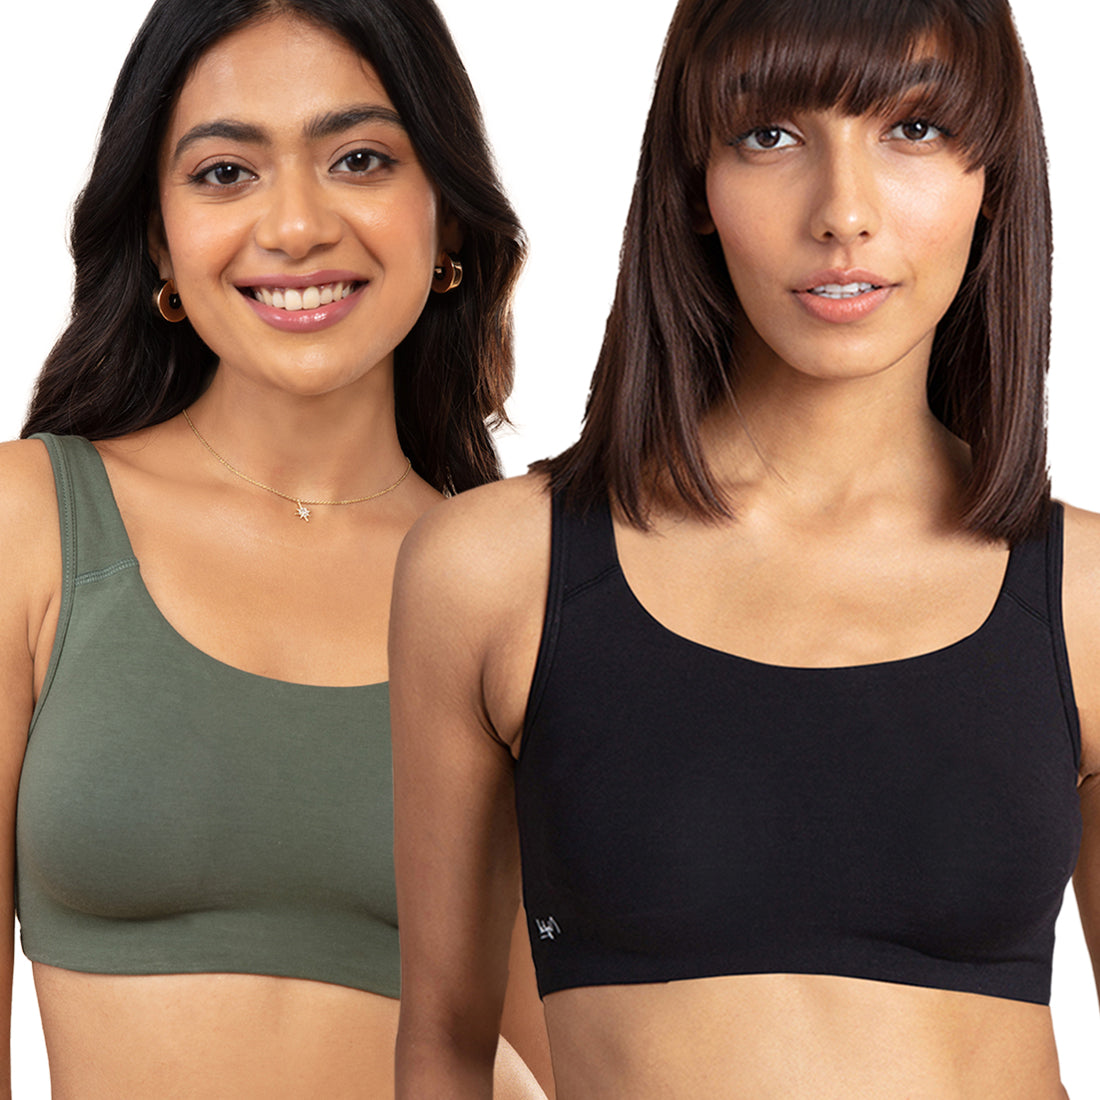 Pack of 2 Soft cup easy-peasy slip-on bra with Full coverage - NYB113 Beetle & Black